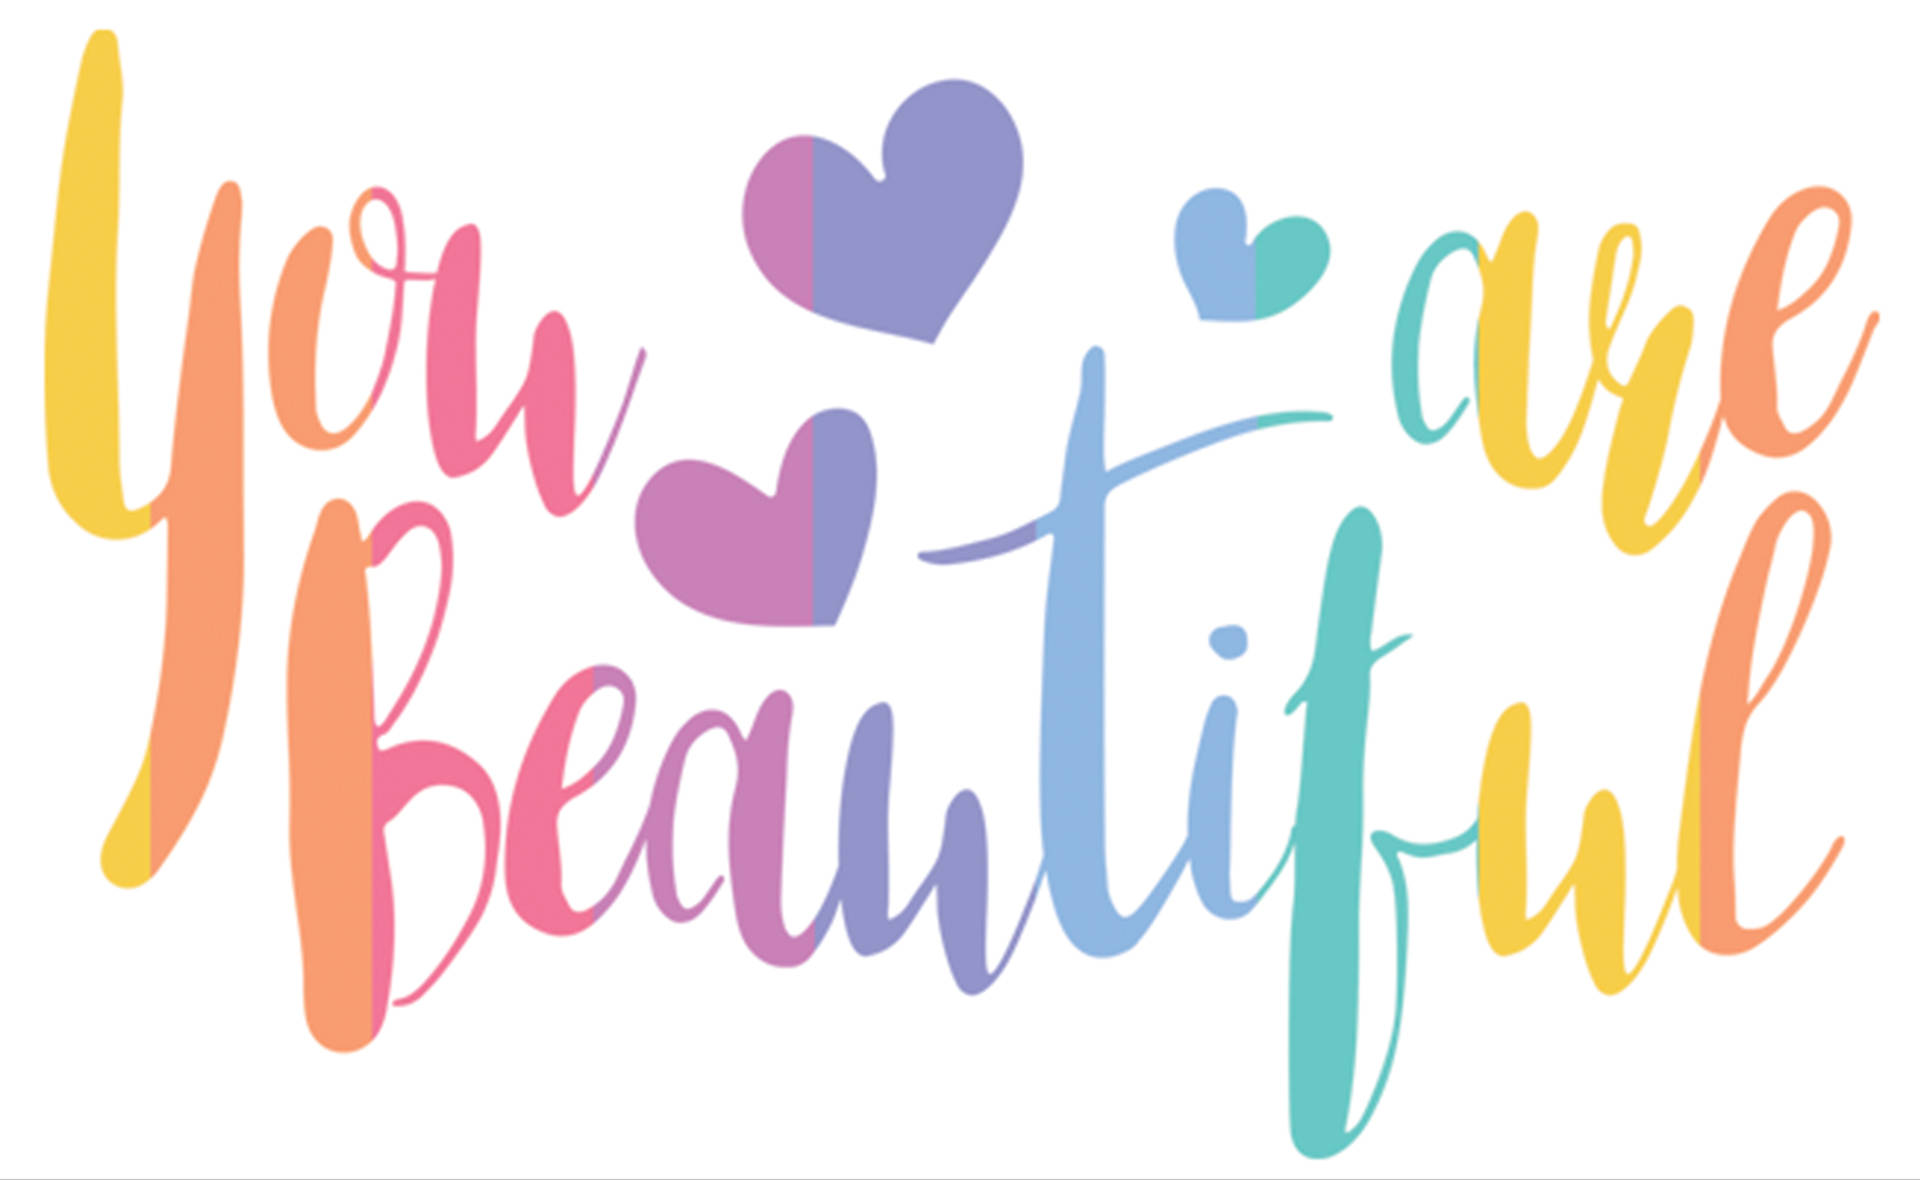 Caption: You Are Beautiful – Colorful Wall Art Background